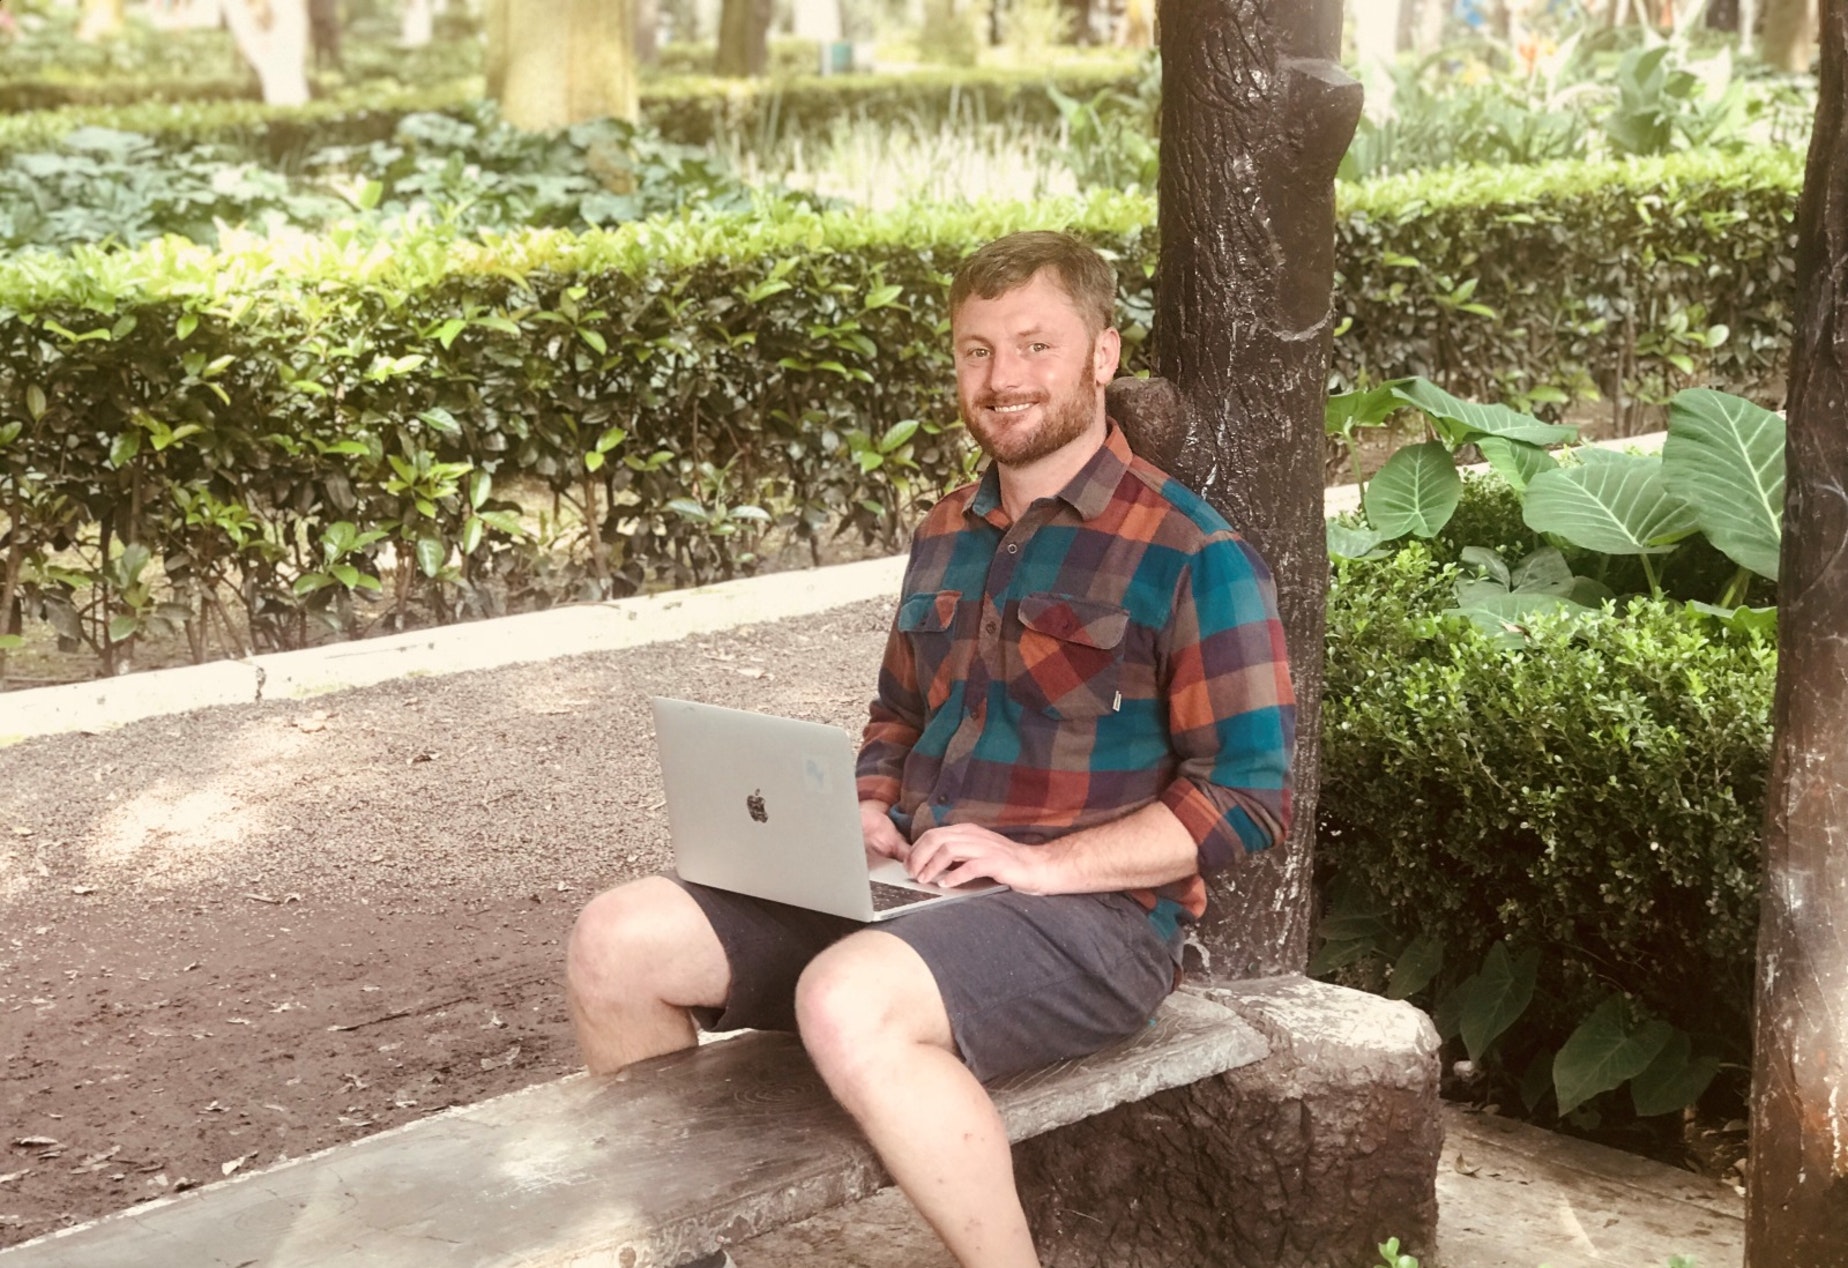 Working from Mexico and other ways to avoid Seattle traffic and rent